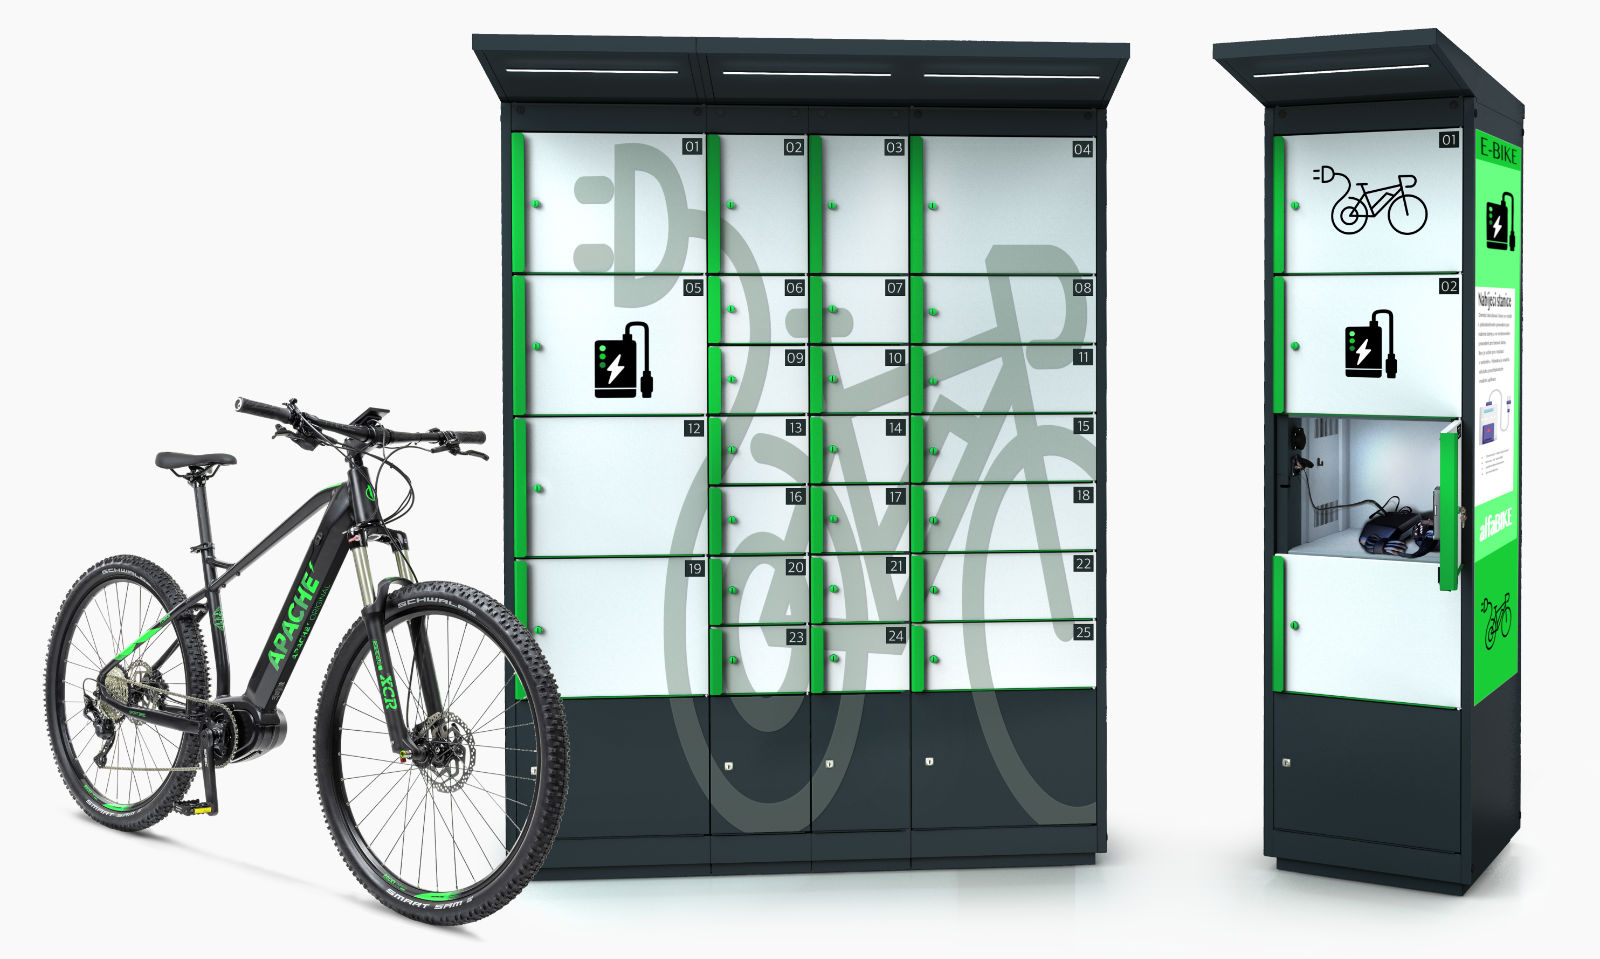 Outdoor e-bike and mobile device battery charging lockers